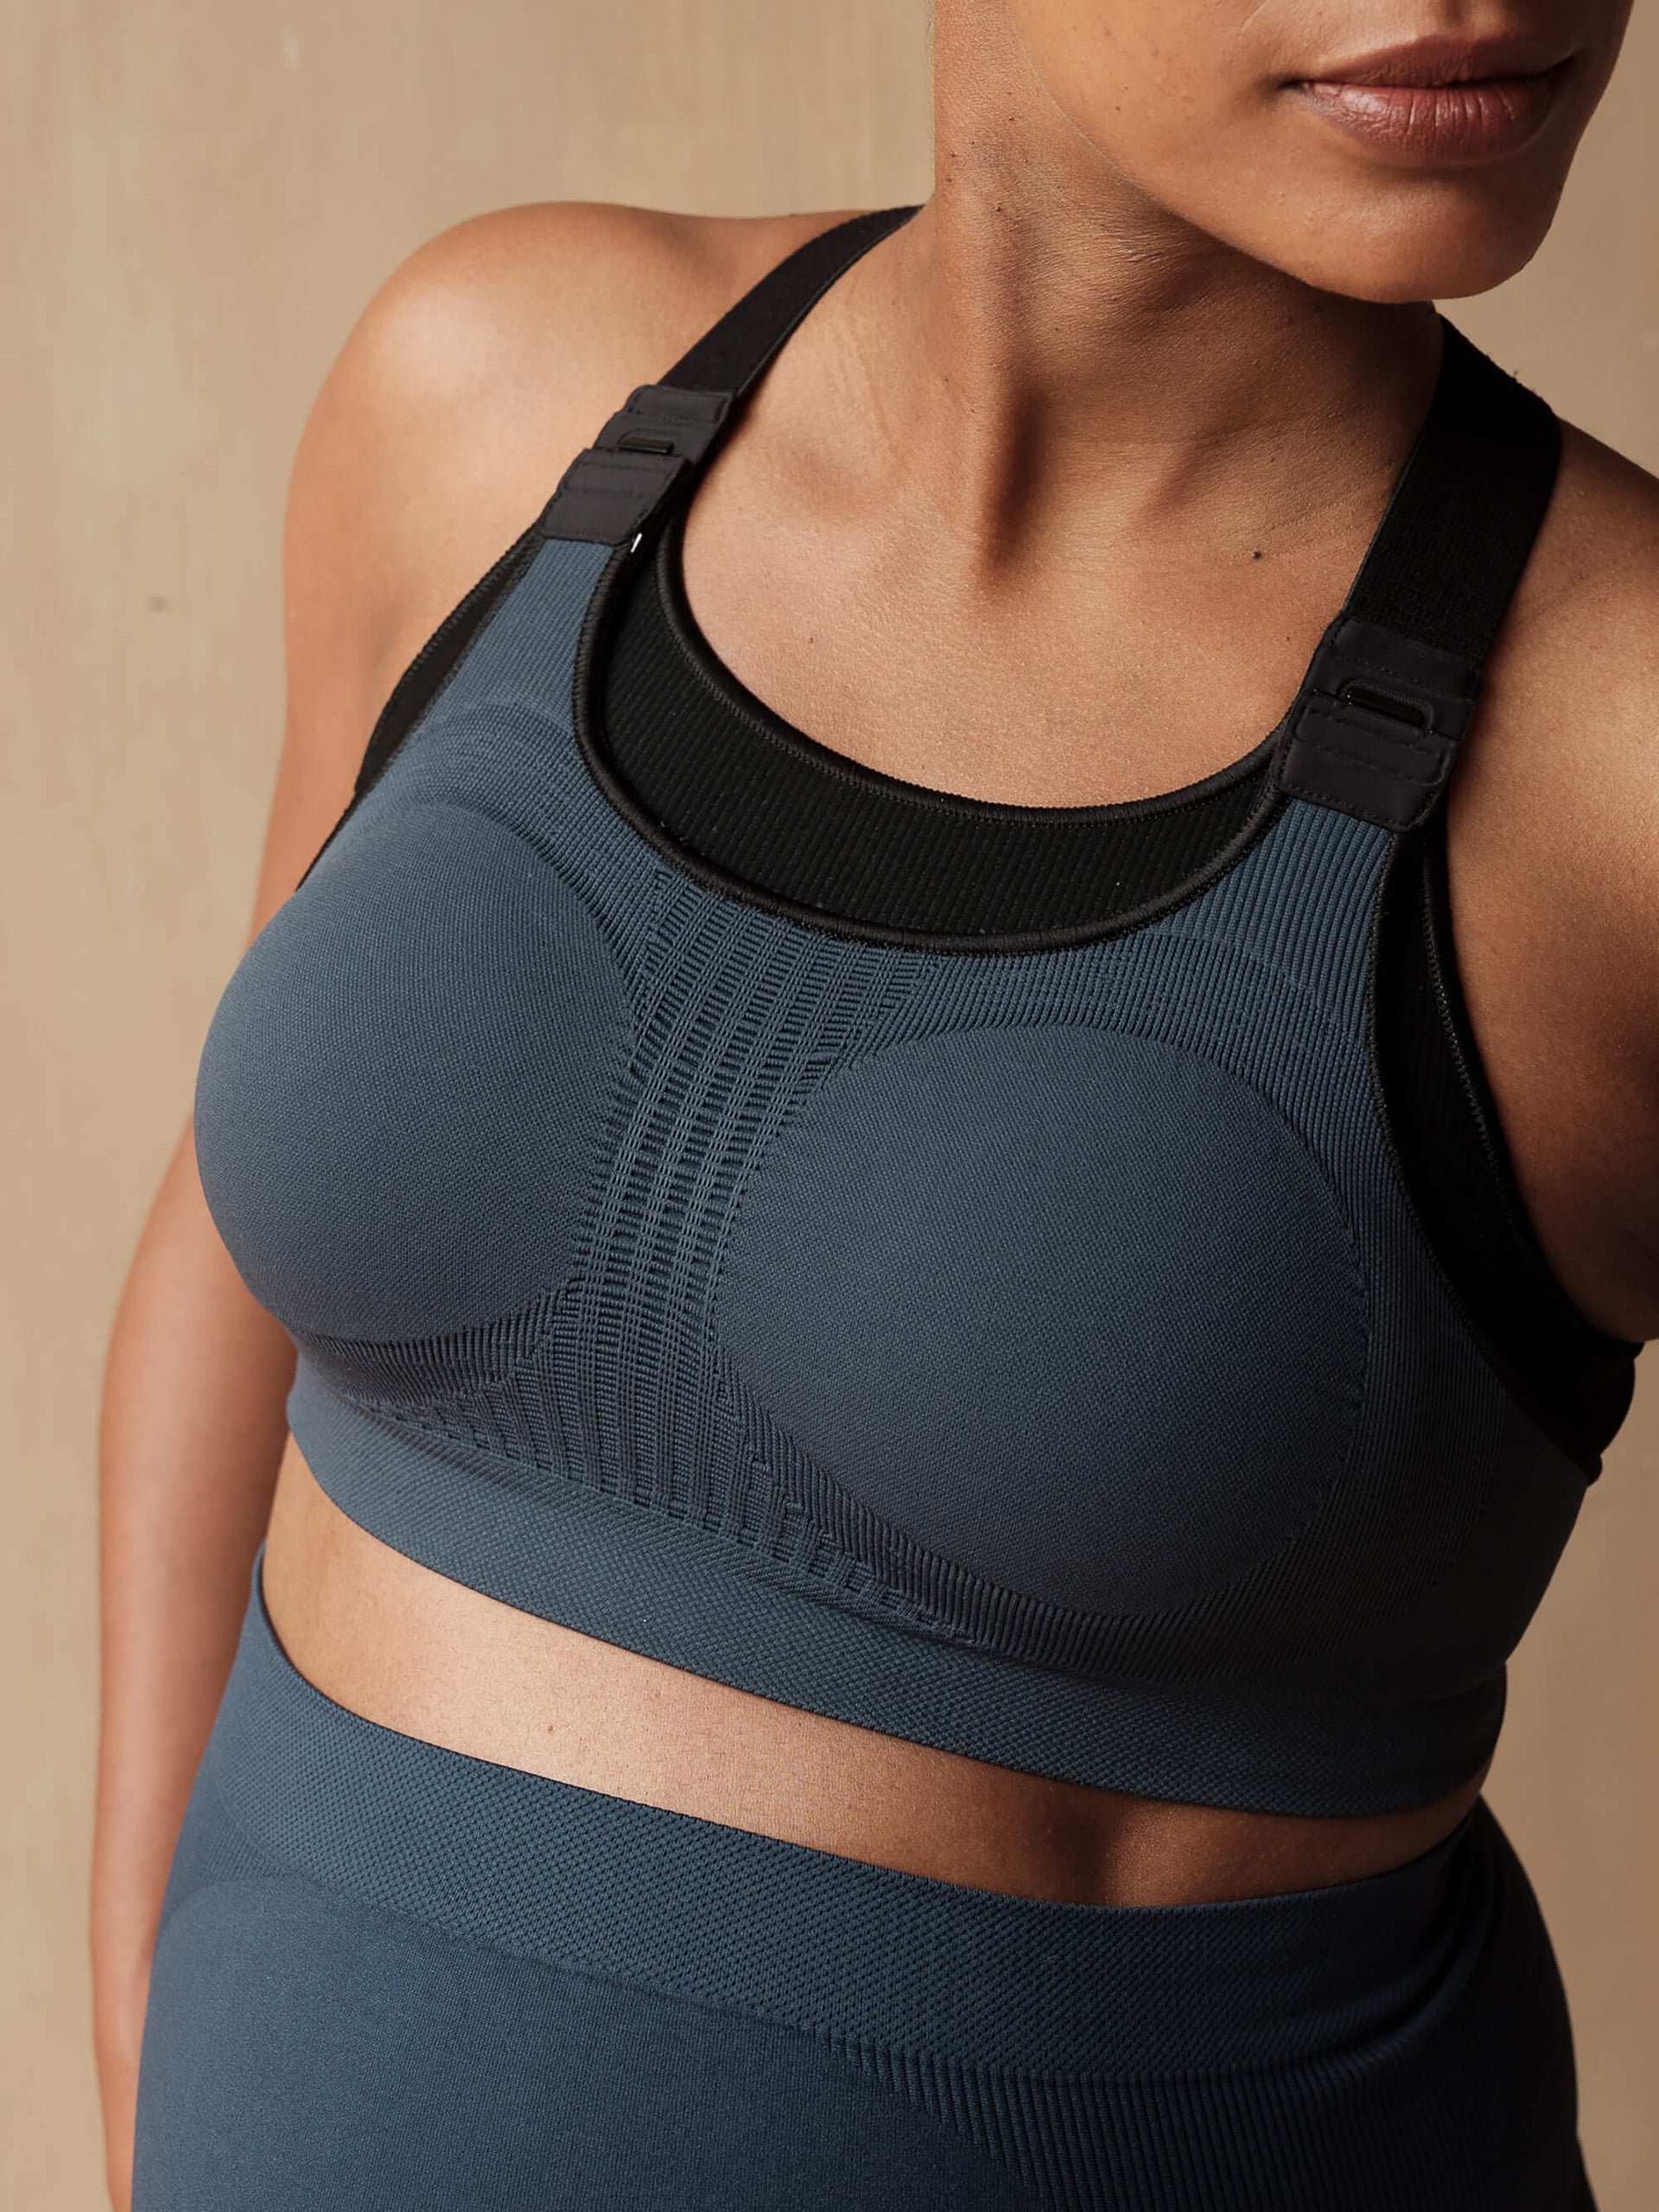 Hold And Mould Sports Bra, Blue